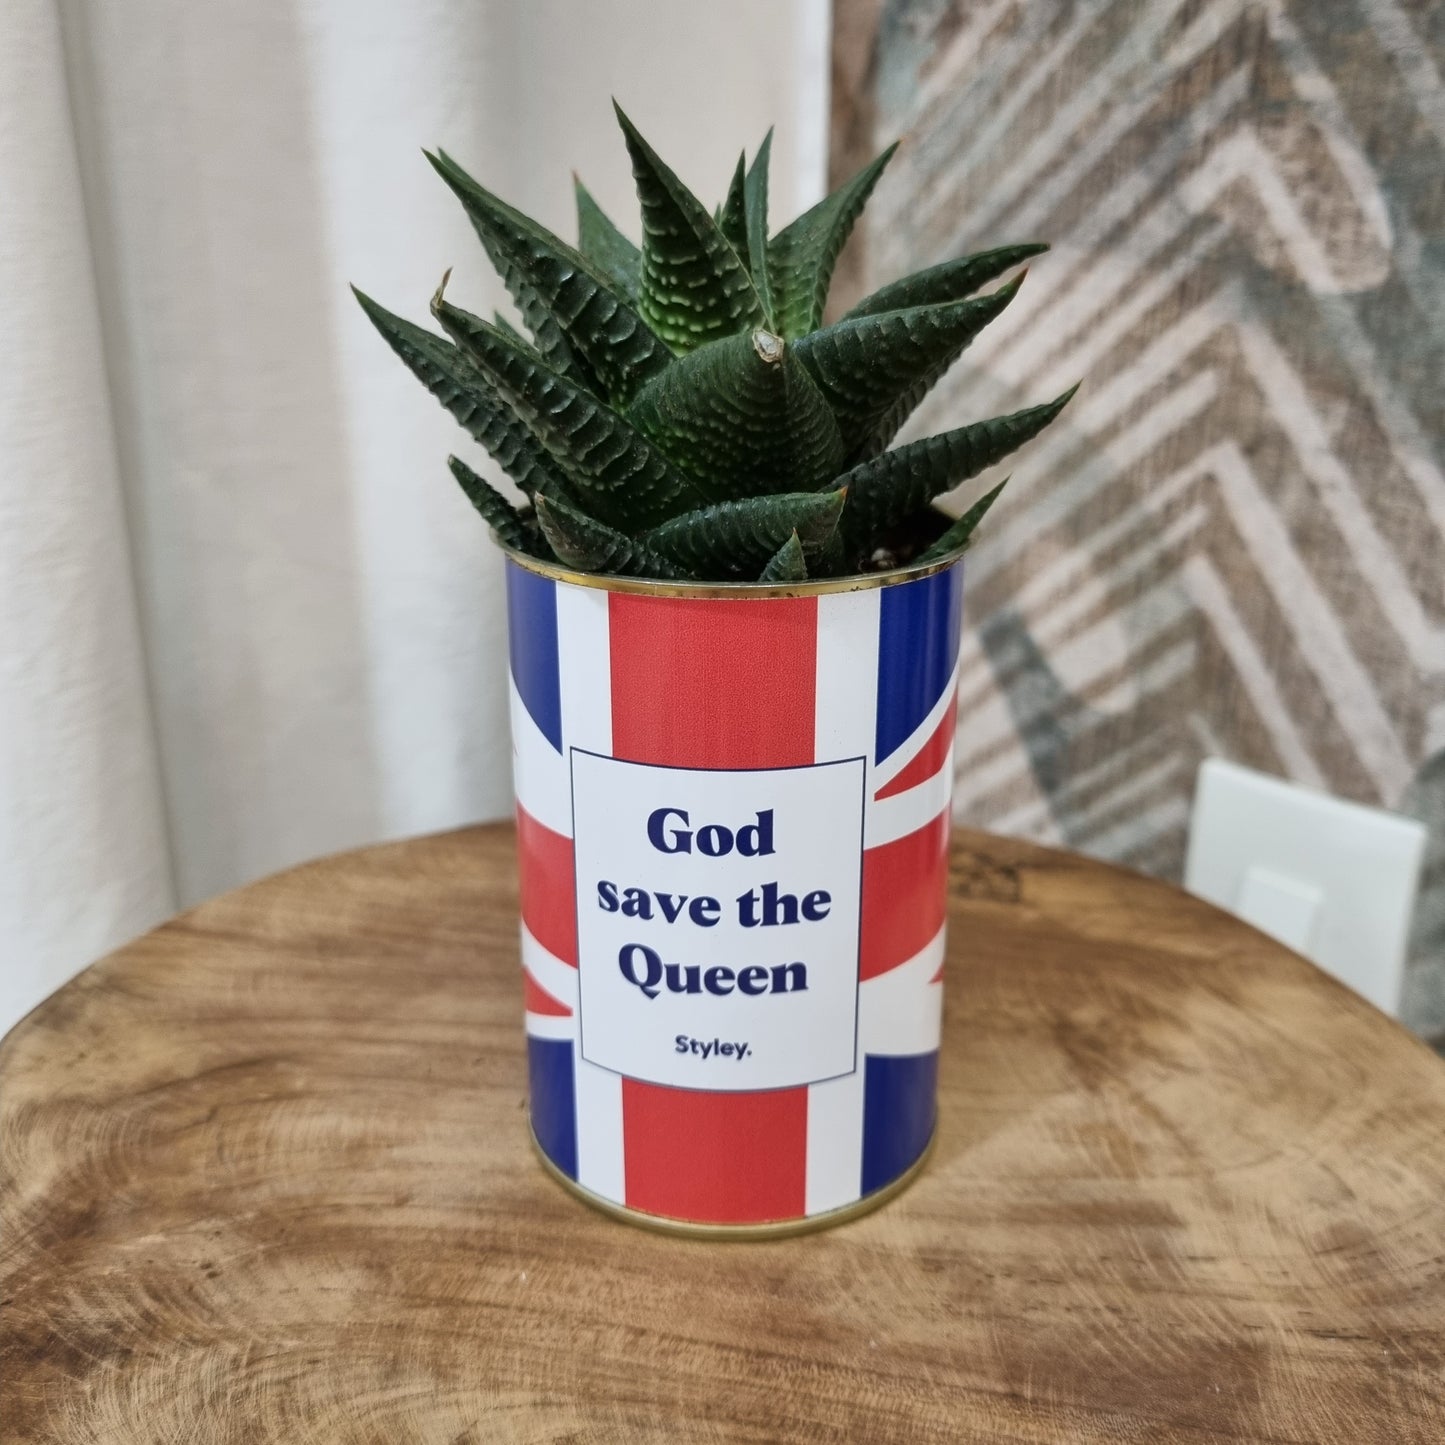 Plante grasse God save the Queen